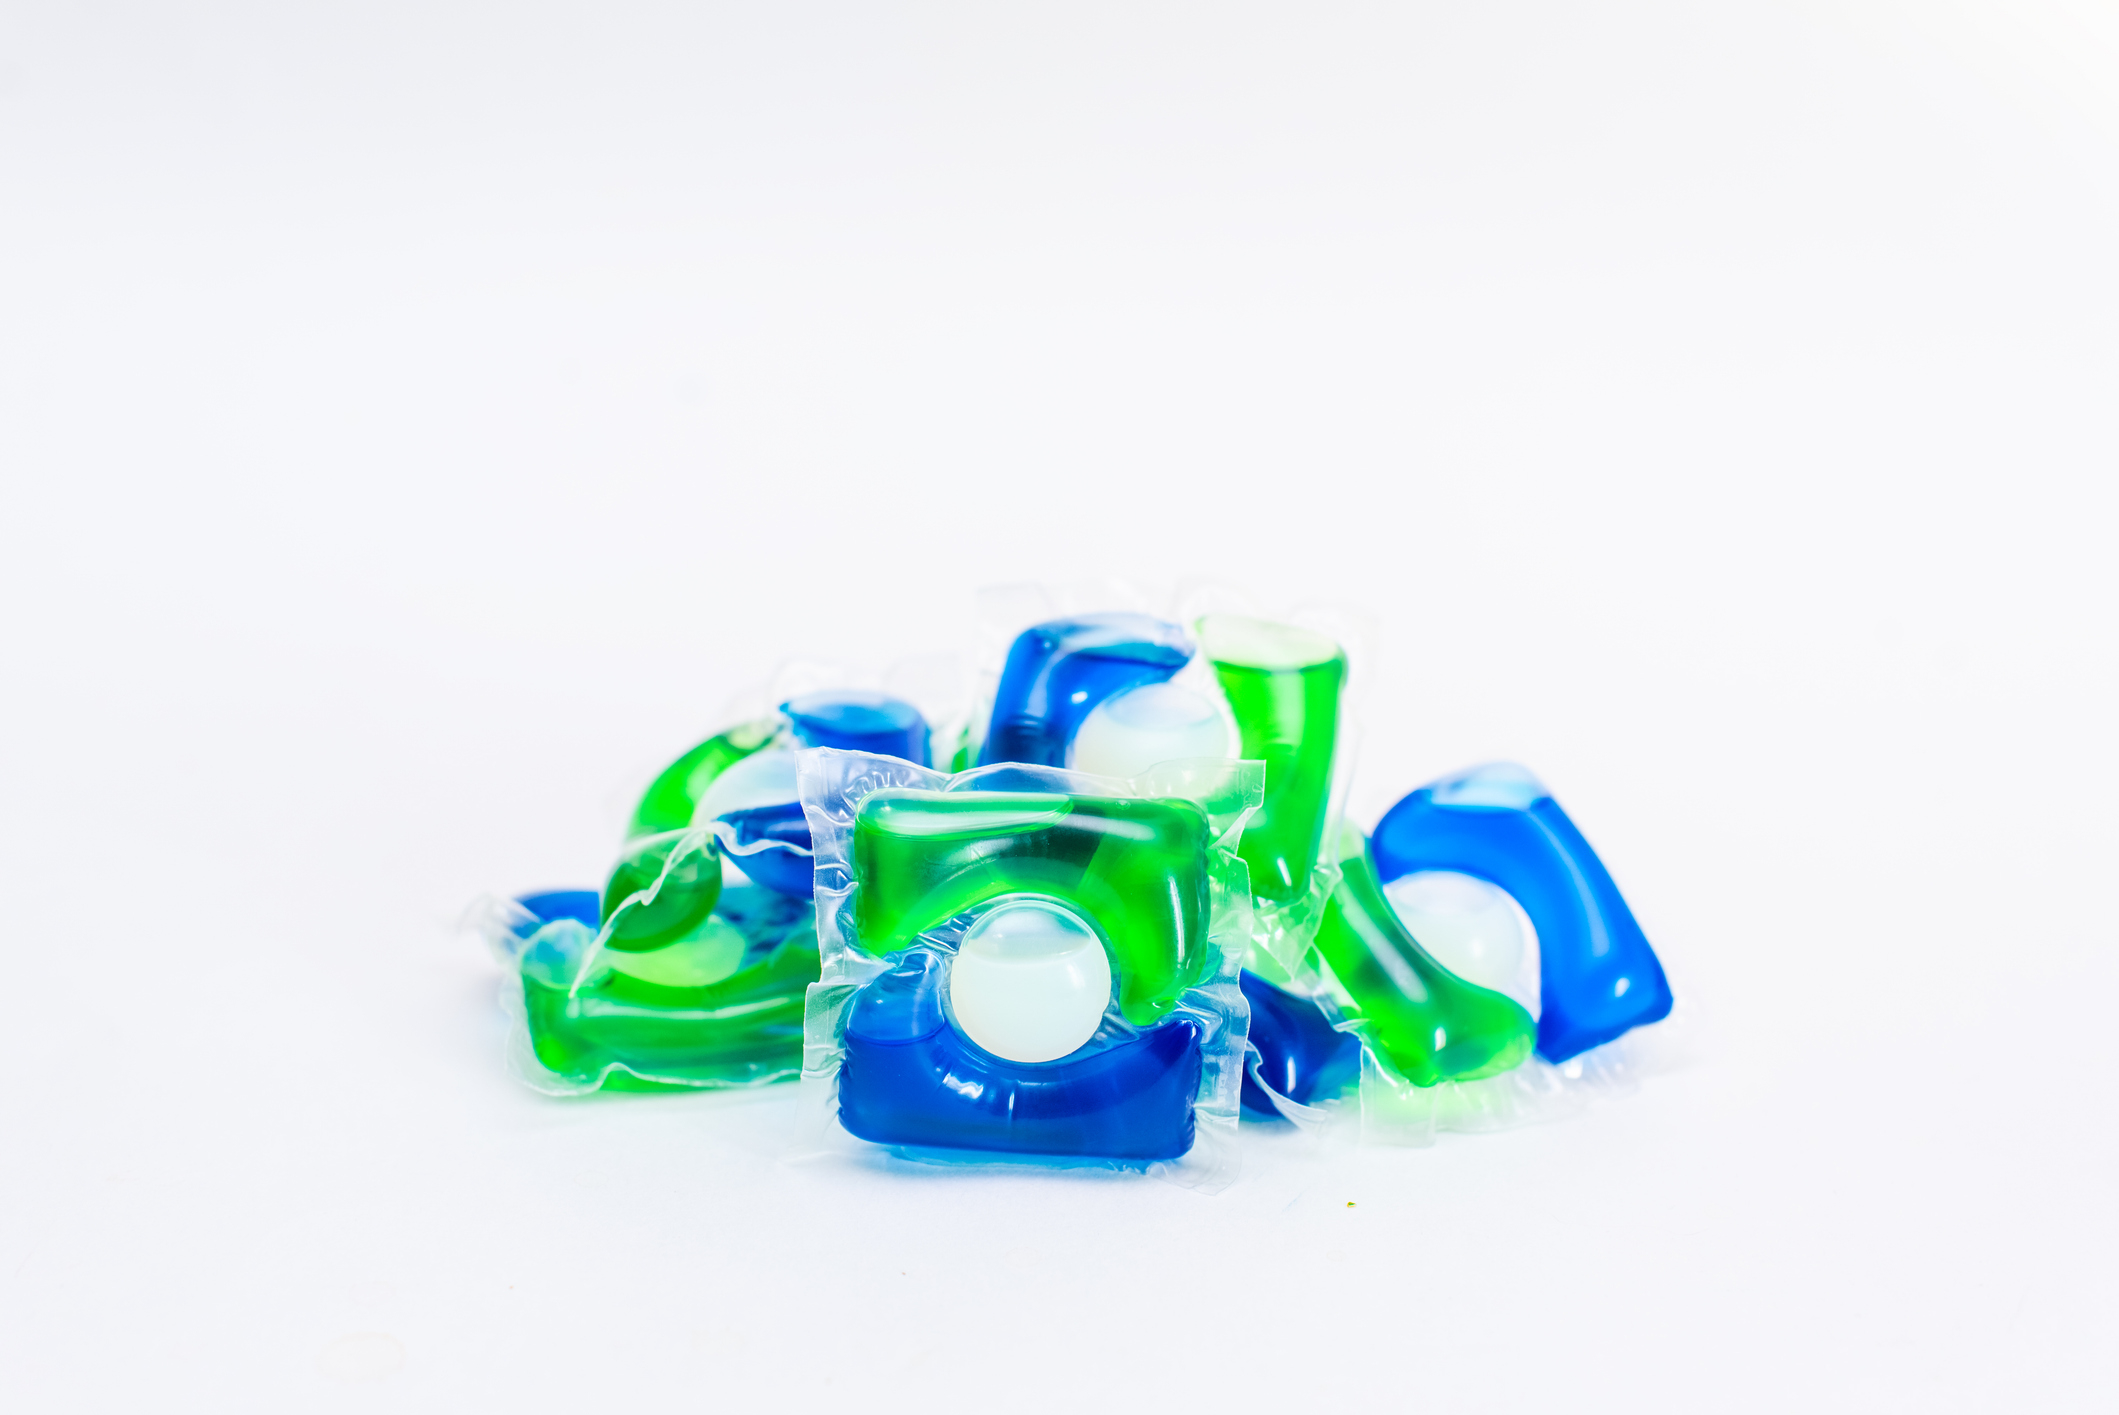 Pile of assorted laundry detergent pods on a plain background